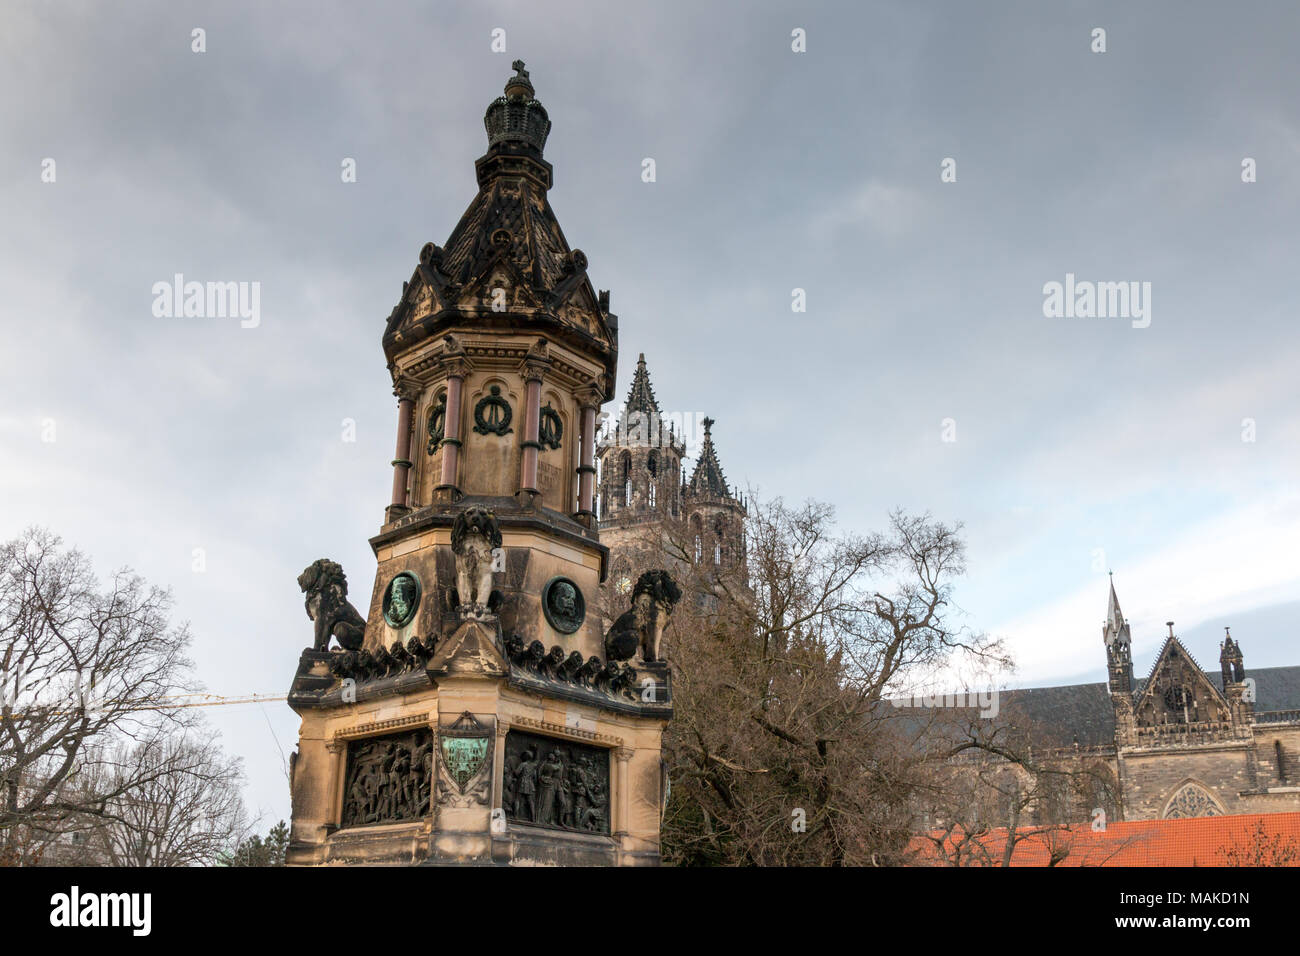 Magdeburg, Germany - March 27, 2018: View of the war memorial Fürstenwall and the cathedral of Magdeburg. The war memorial refers to Prussian wars and Stock Photo